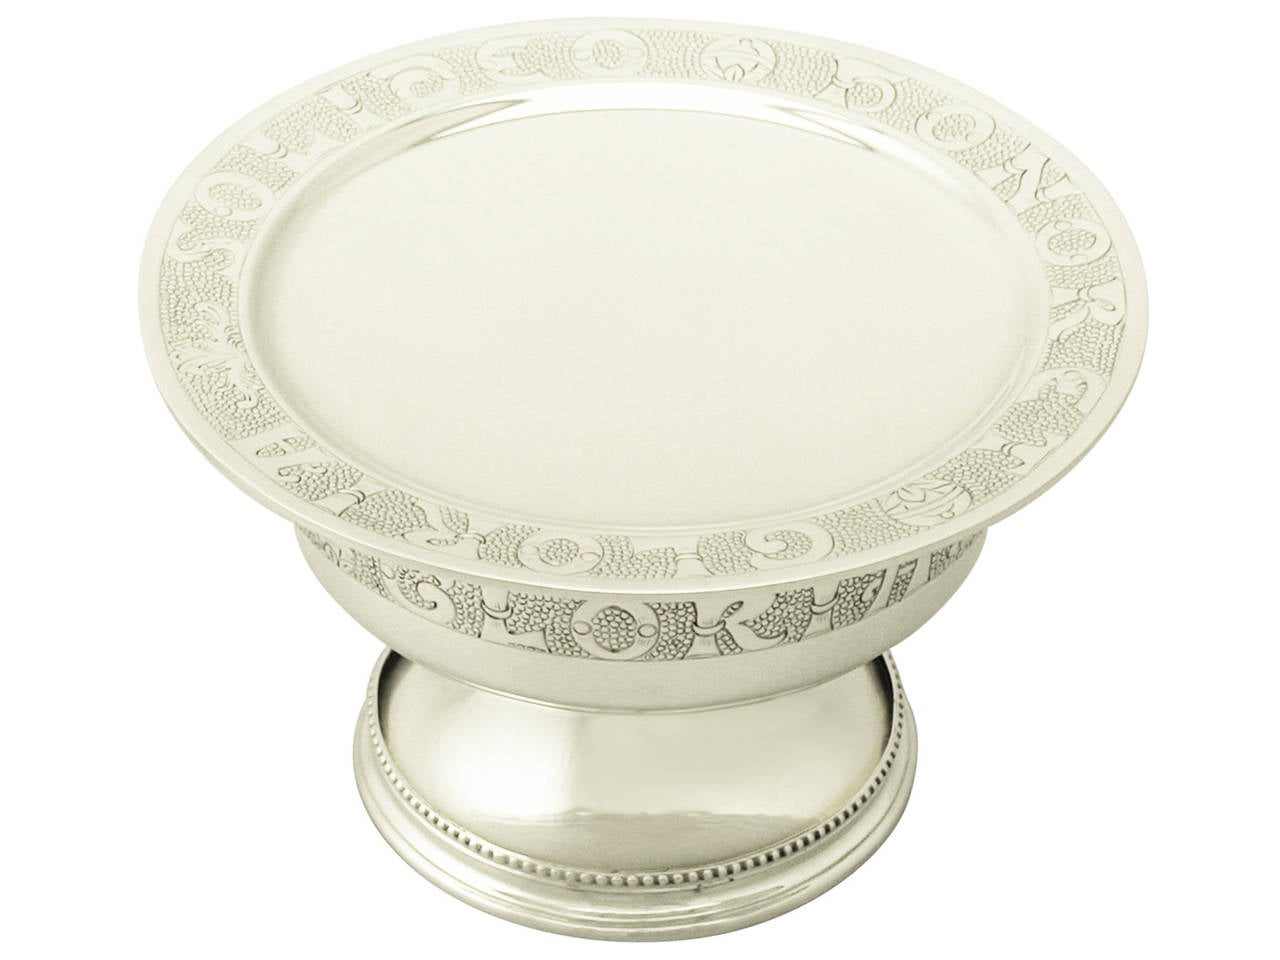 A fine and impressive antique George V English sterling silver chalice/pyx and paten; an addition to our diverse ecclesiastical silverware collection

This fine two piece antique George V sterling silver set consists of a chalice/pyx and